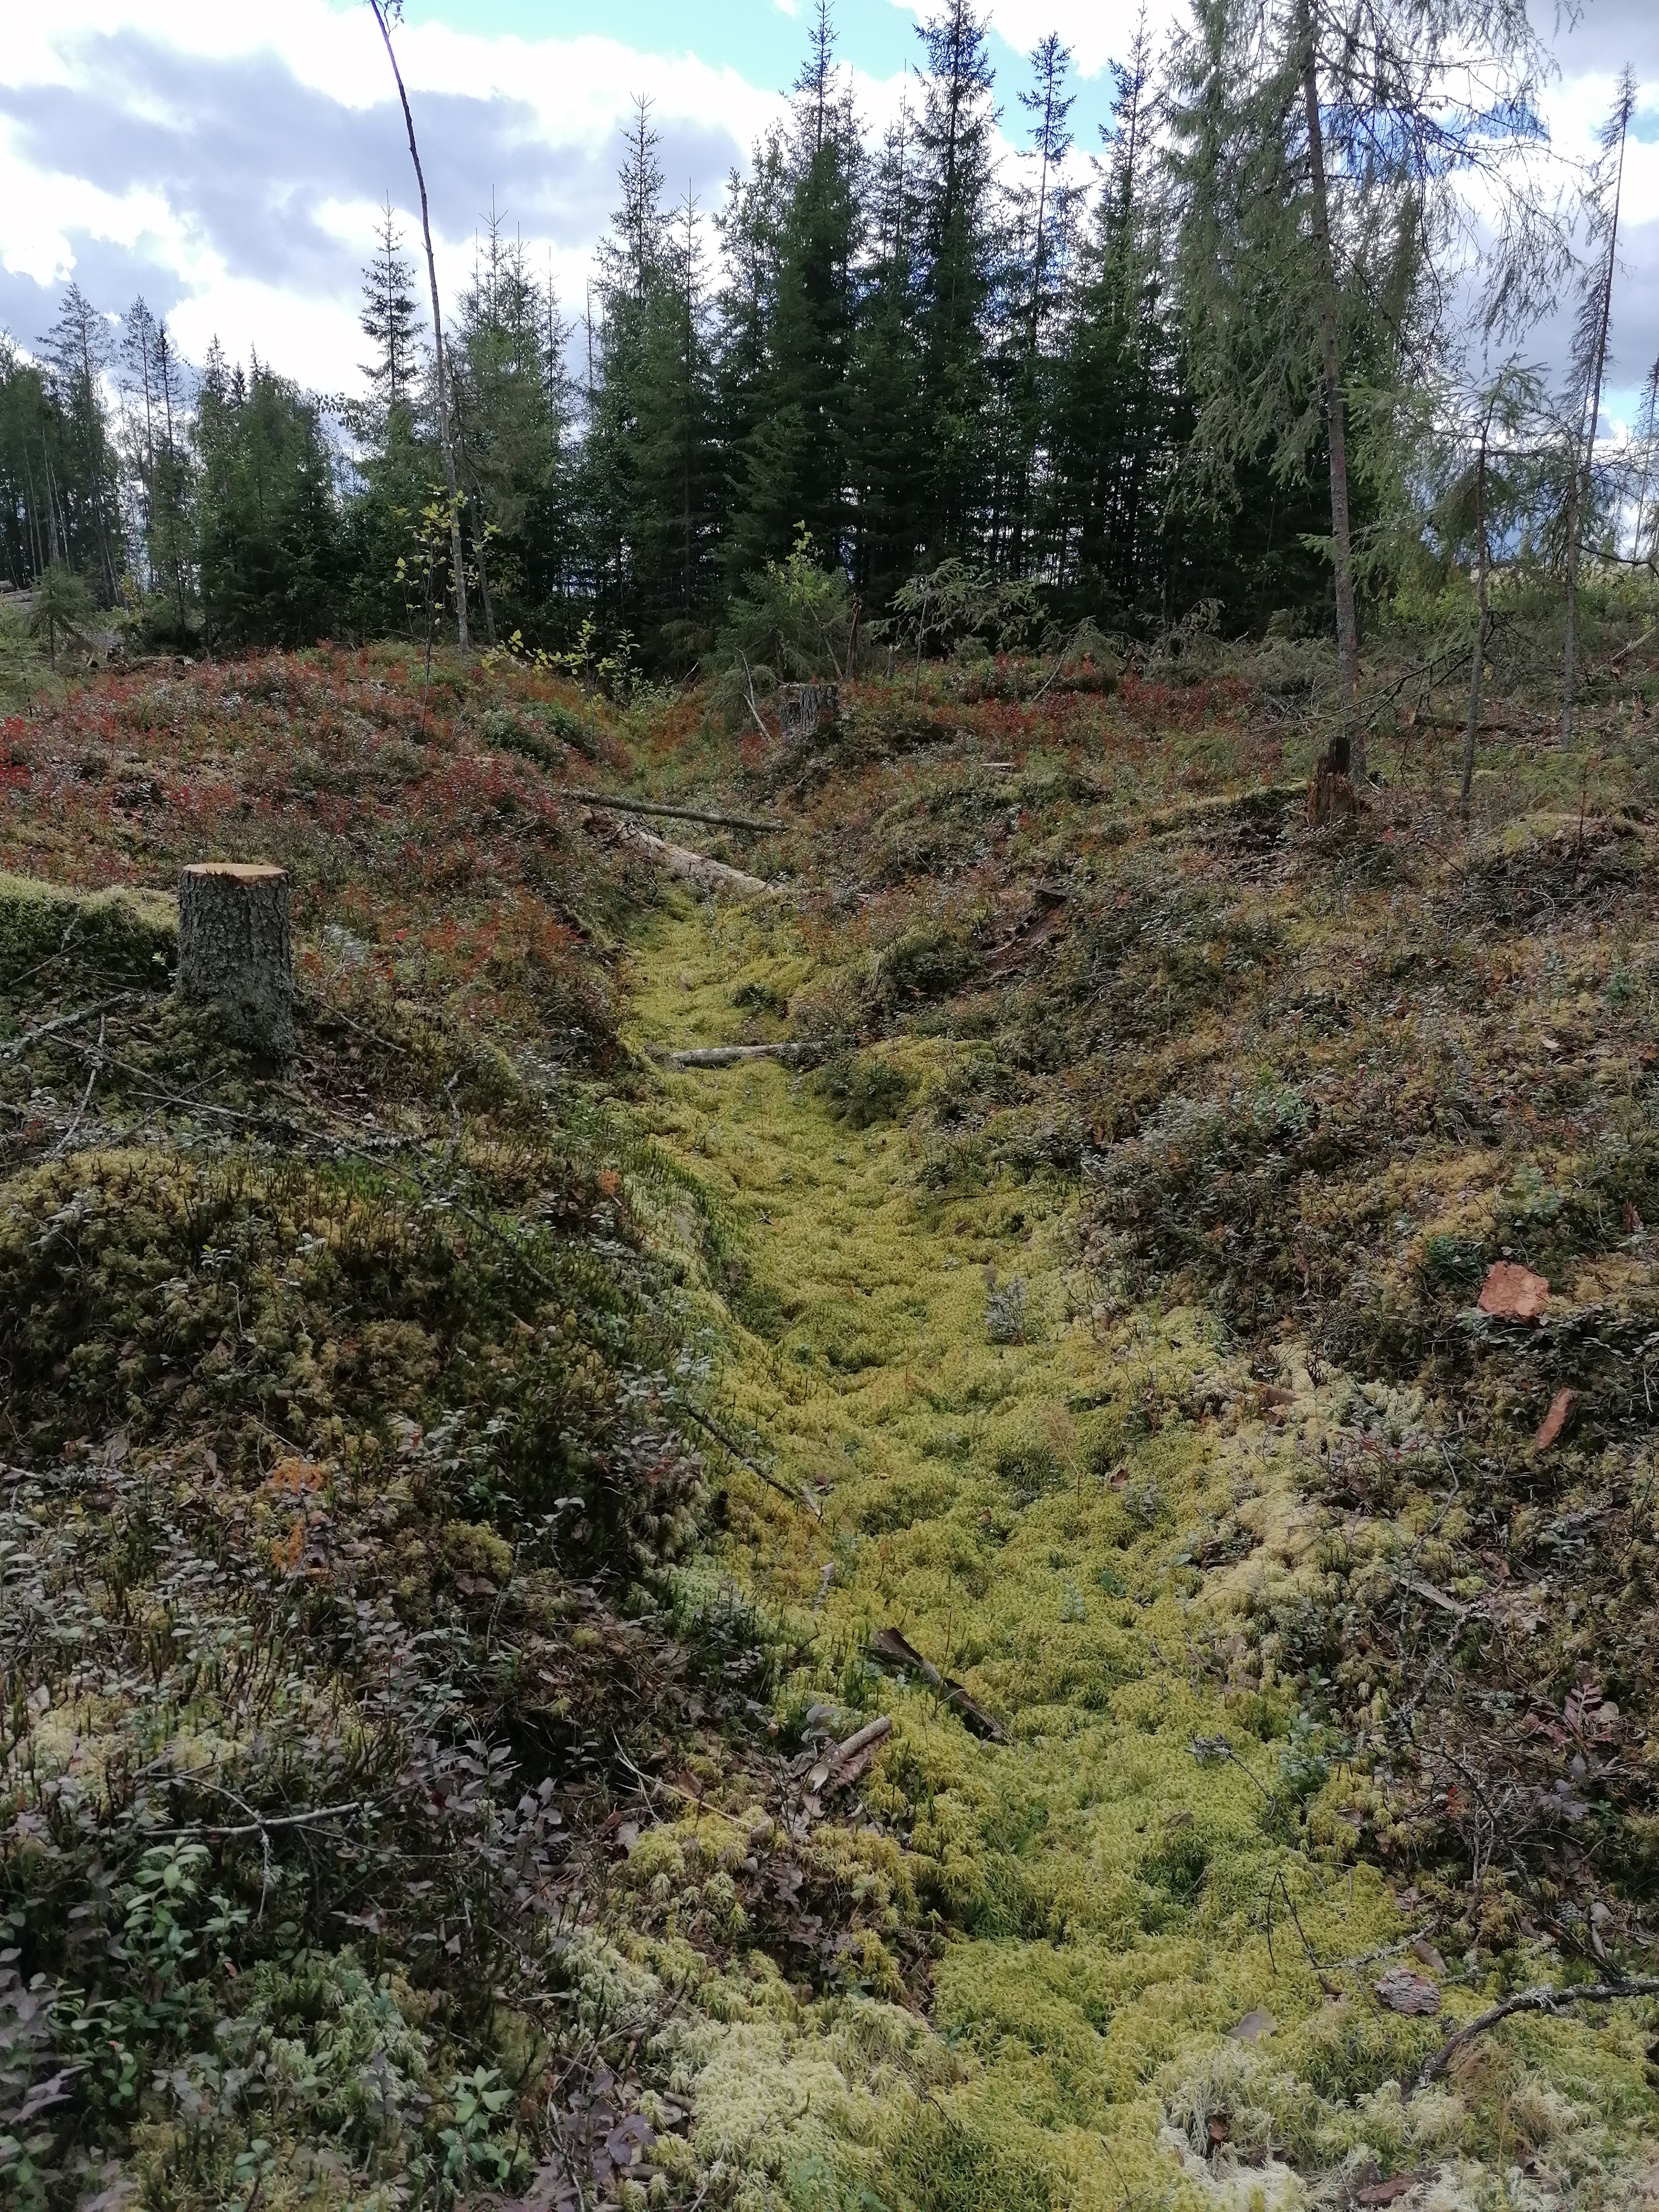 Forest Ditch Cleaning and its Effect on Mobilization of an Old Soil ...